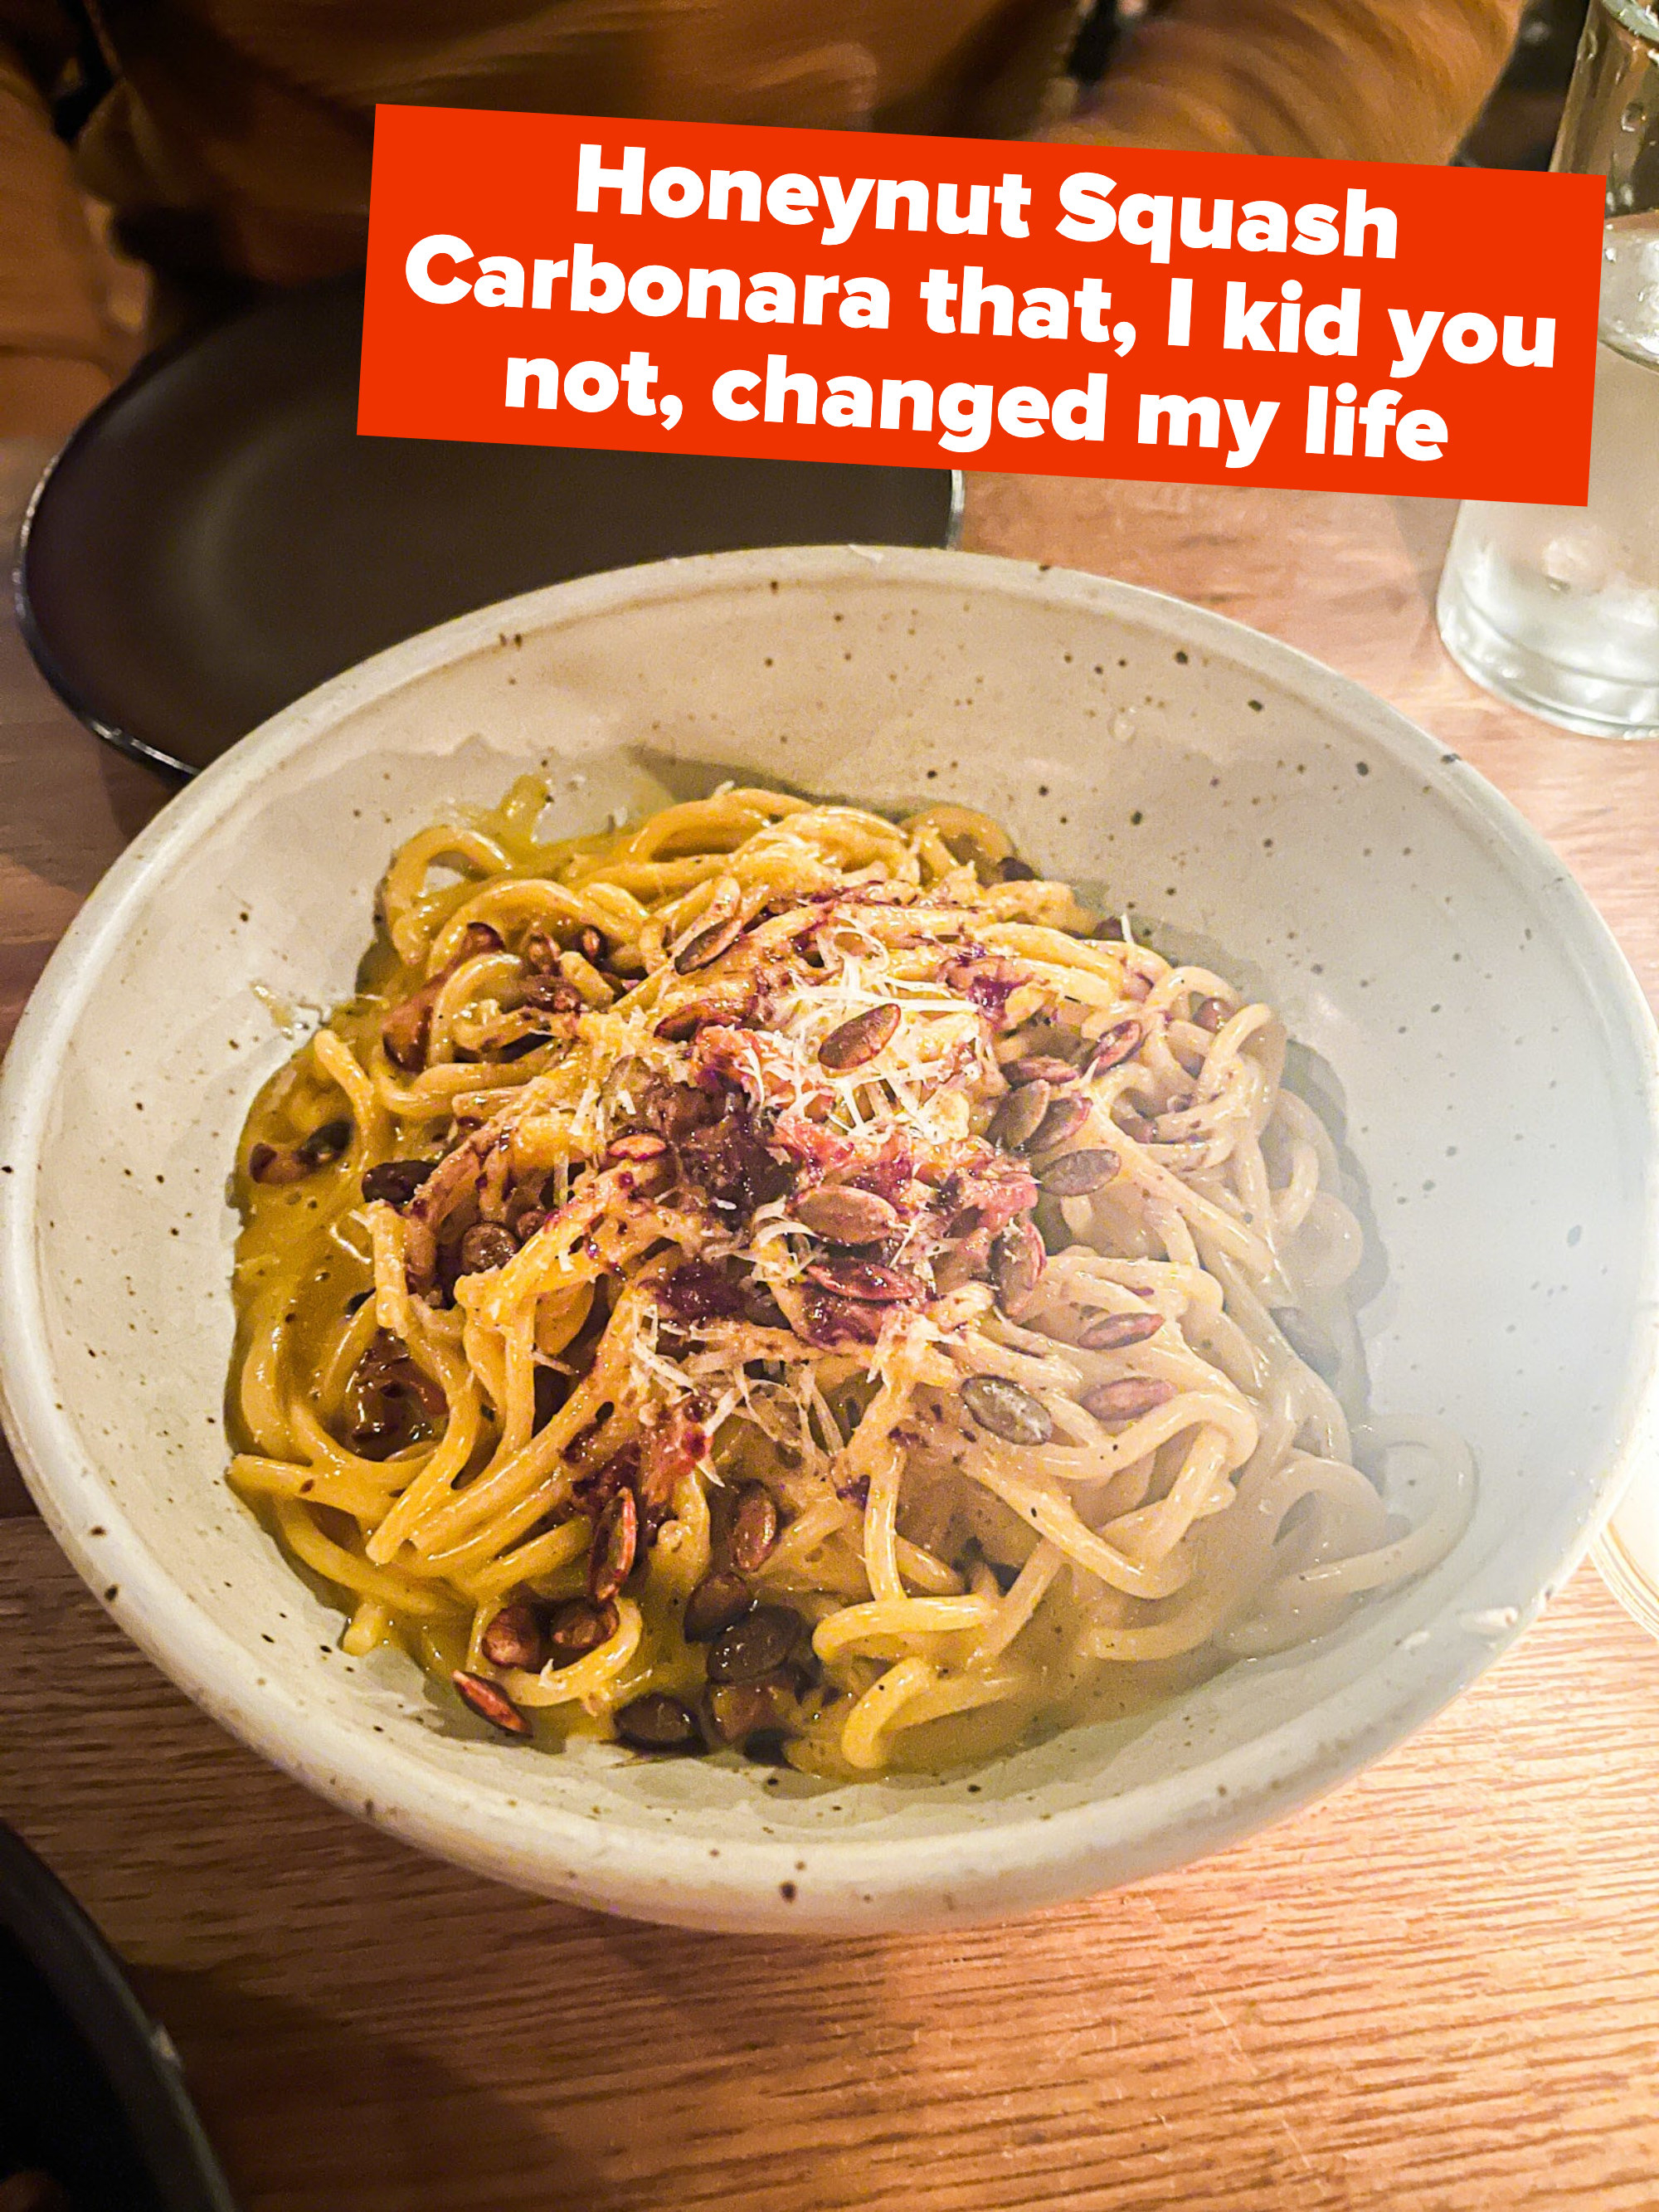 A bowl of carbonara with the text &quot;Honeynut Squash Carbonara that, I kid you not, changed my life&quot;